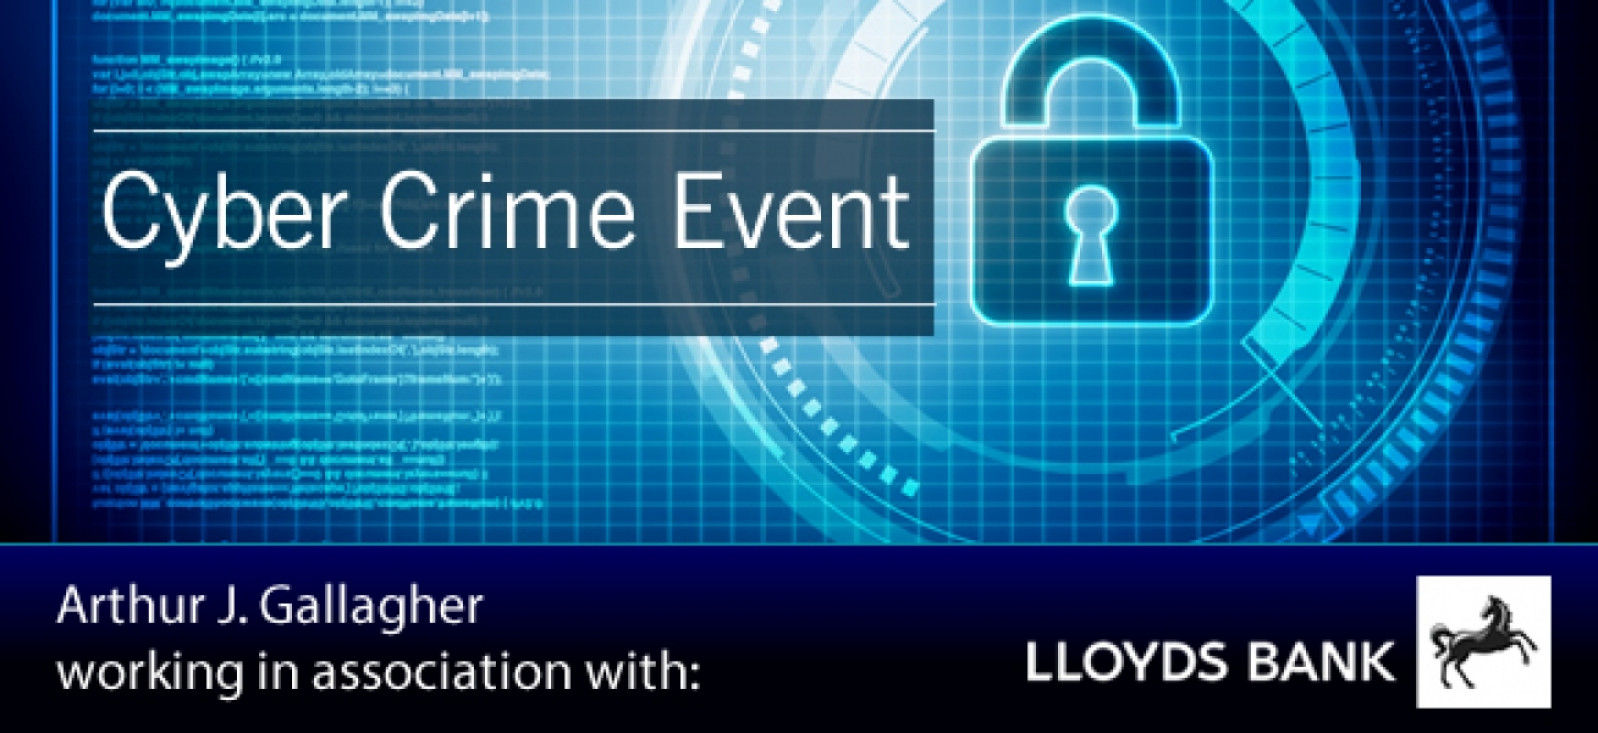 Cyber Crime Event - How to protect your business